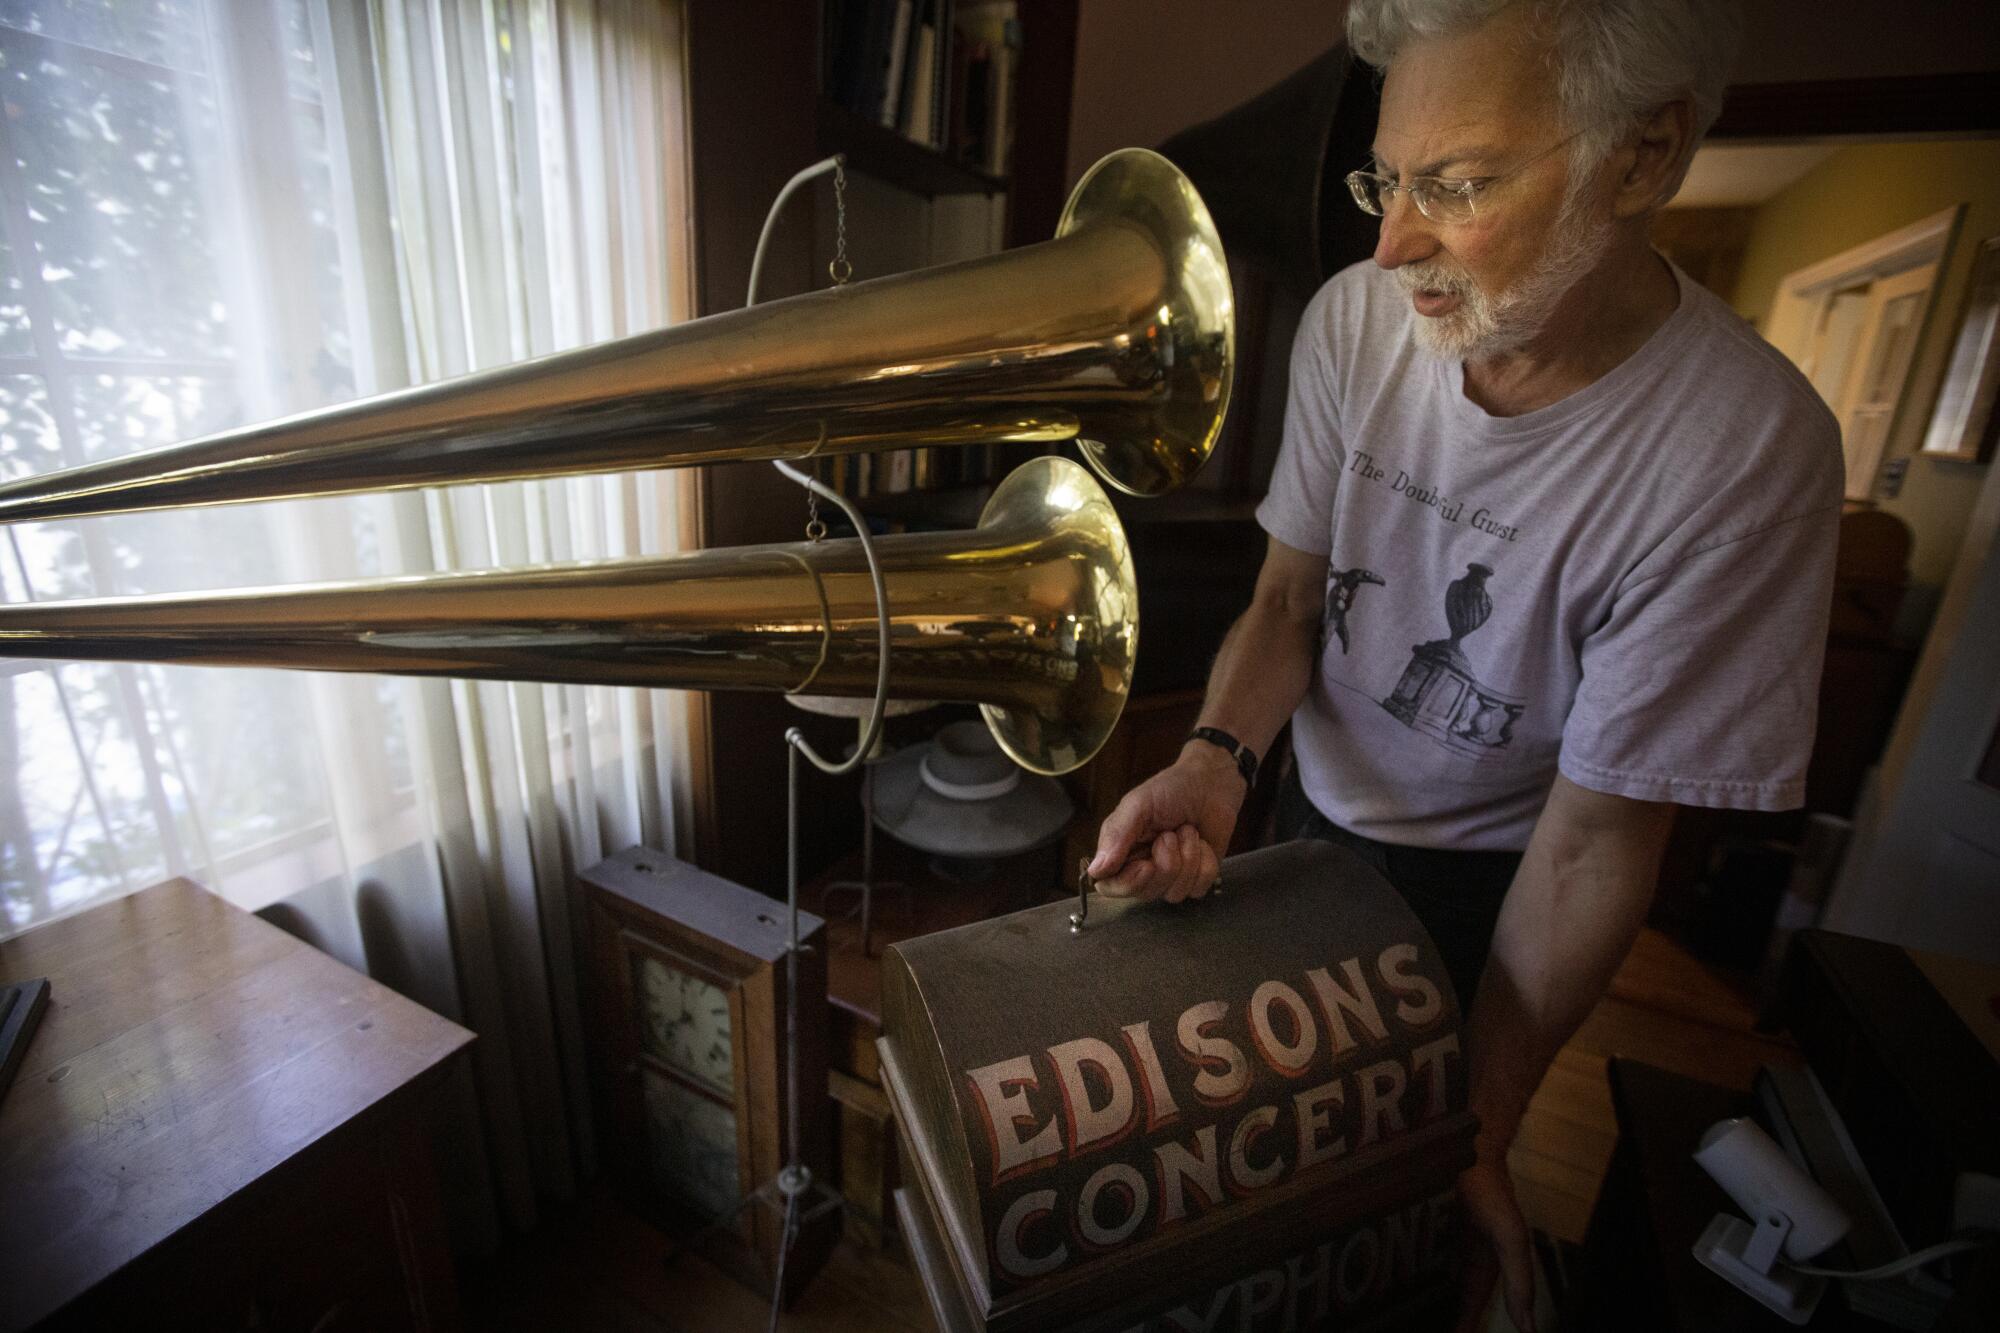 Collector John Levin stands next to what he describes as “a 1900 double-horned phonograph"